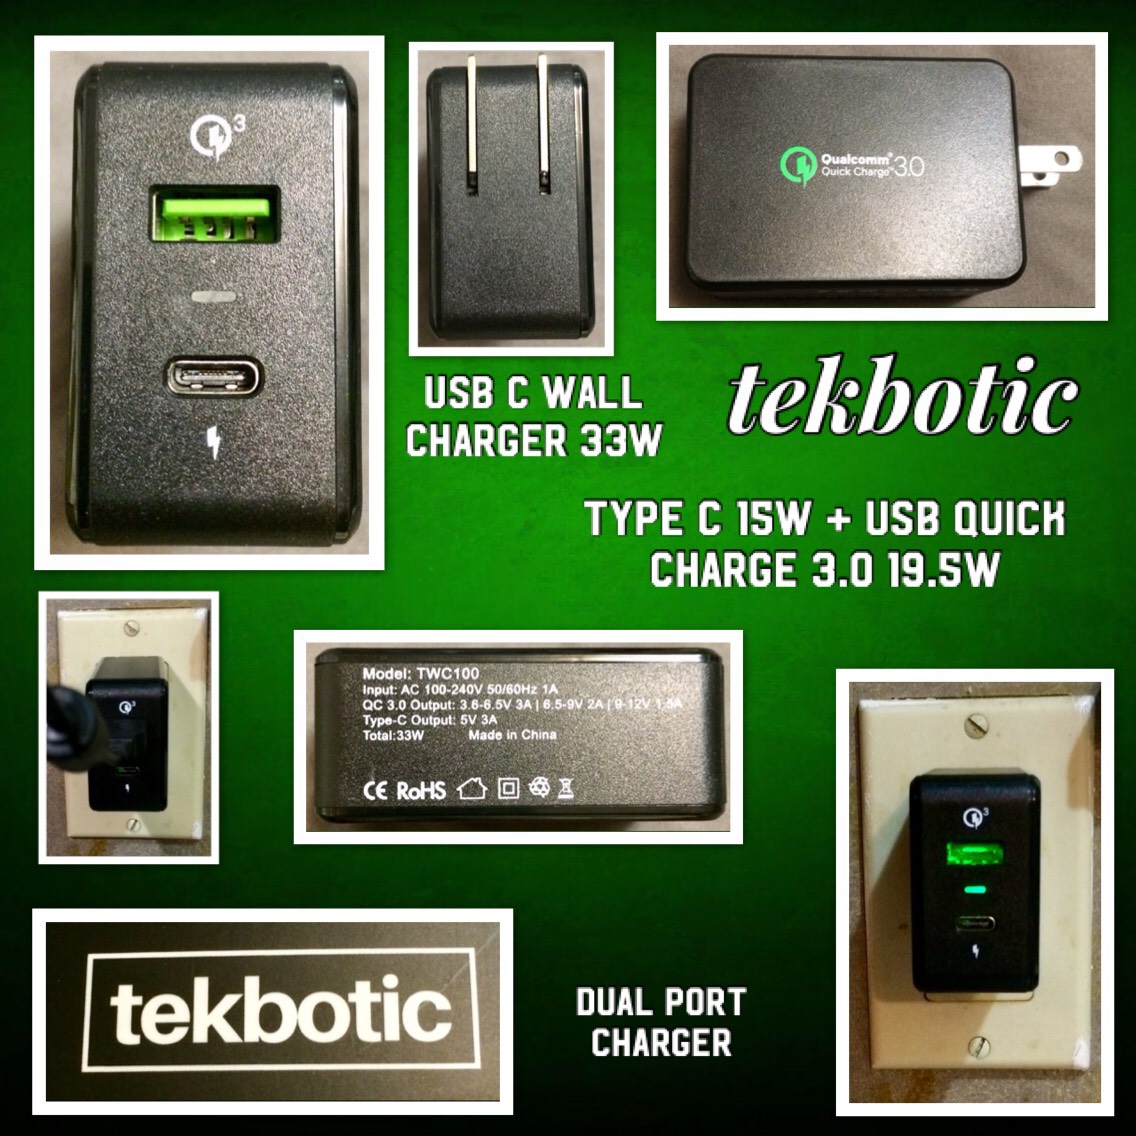 USB C Wall Charger 33w - Dual Port Charger - Type C 15w + USB Quick Charge 3.0 19.5w - tekbotic - 2-Port Travel Adapter For Switch, Pixel, iPhone, iPad, Galaxy, Oneplus, Hauwei, Lumia, And More - tekbotic